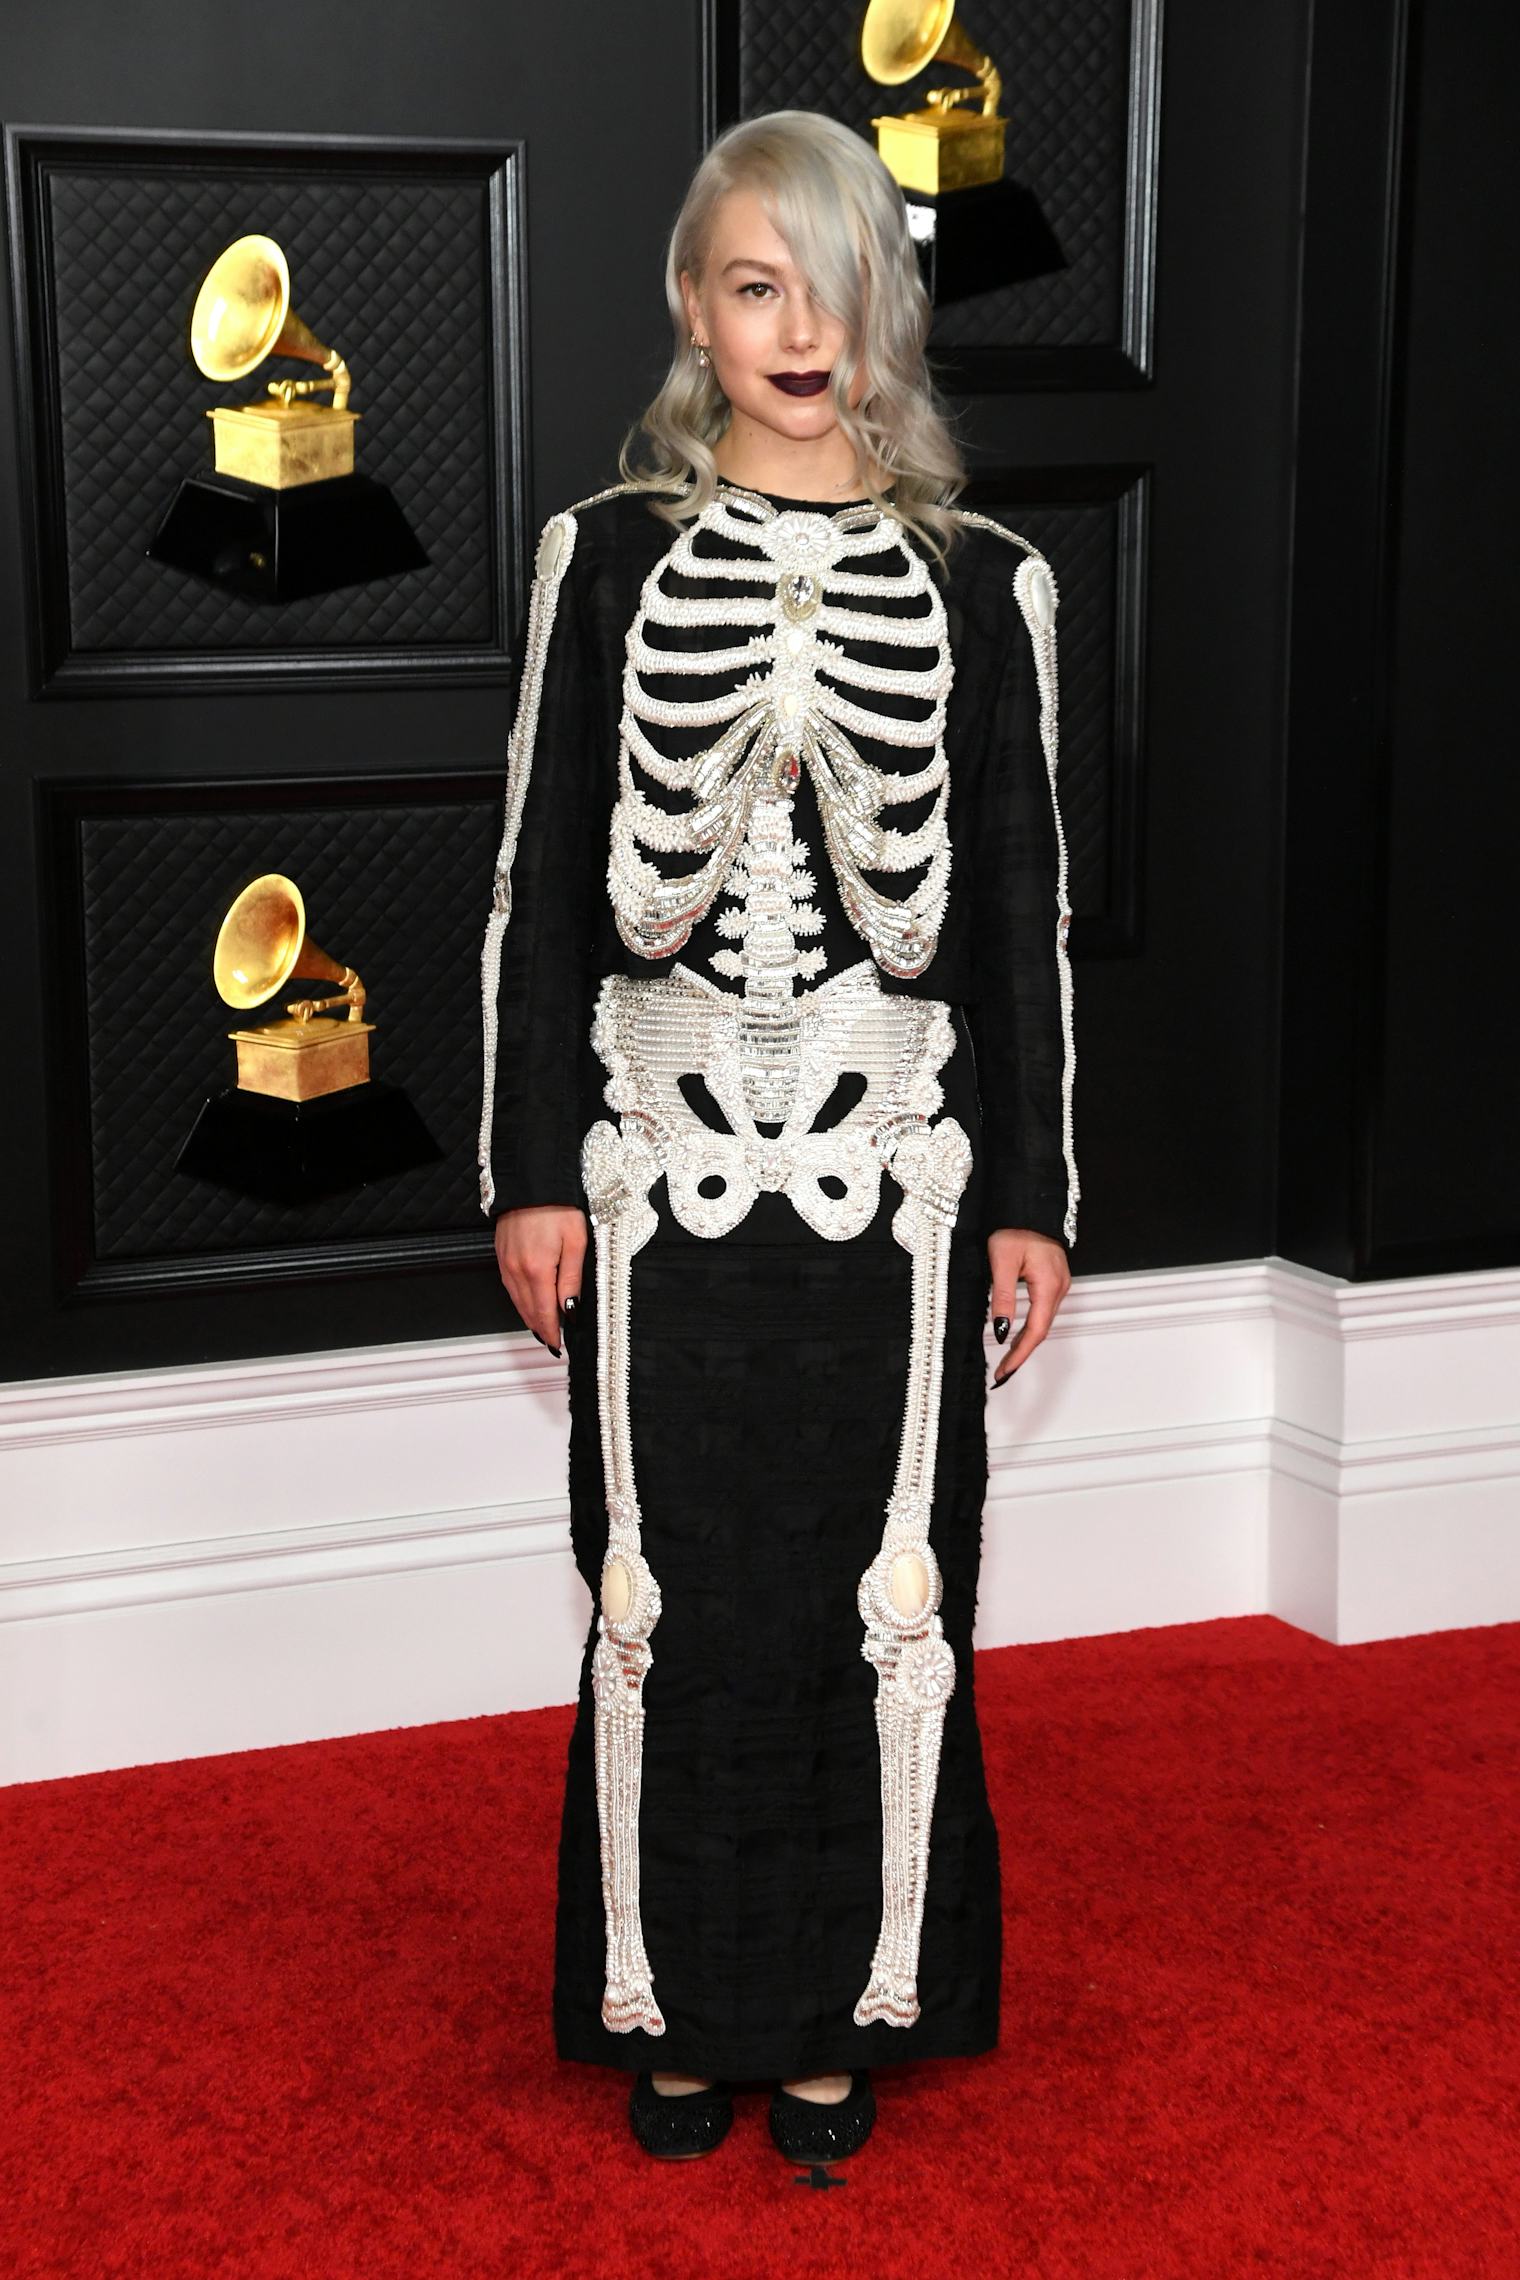 How To Buy Phoebe Bridgers' Skeleton Outfit For A Halloween Costume